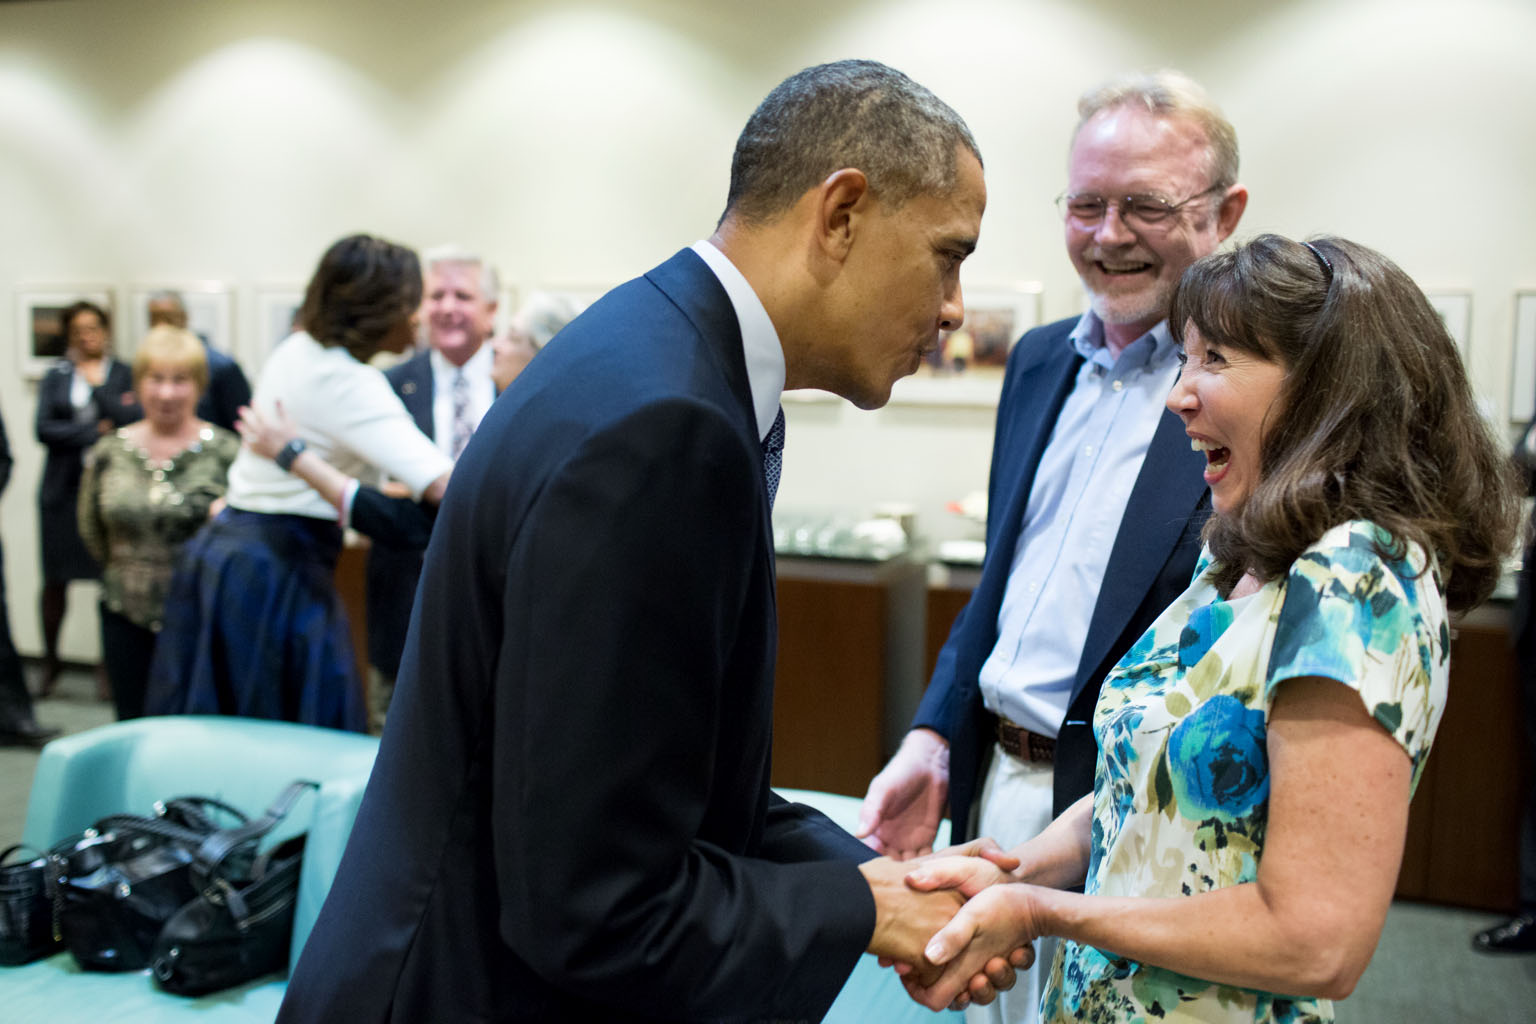 President Barack Obama and First Lady Michelle Obama meet with Texans who wrote letters to the President about the Affordable Care Act (ACA), at the Lyndon B. Johnson (LBJ) Presidential Library and Museum in Austin, Texas, April 10, 2014. Participants inc